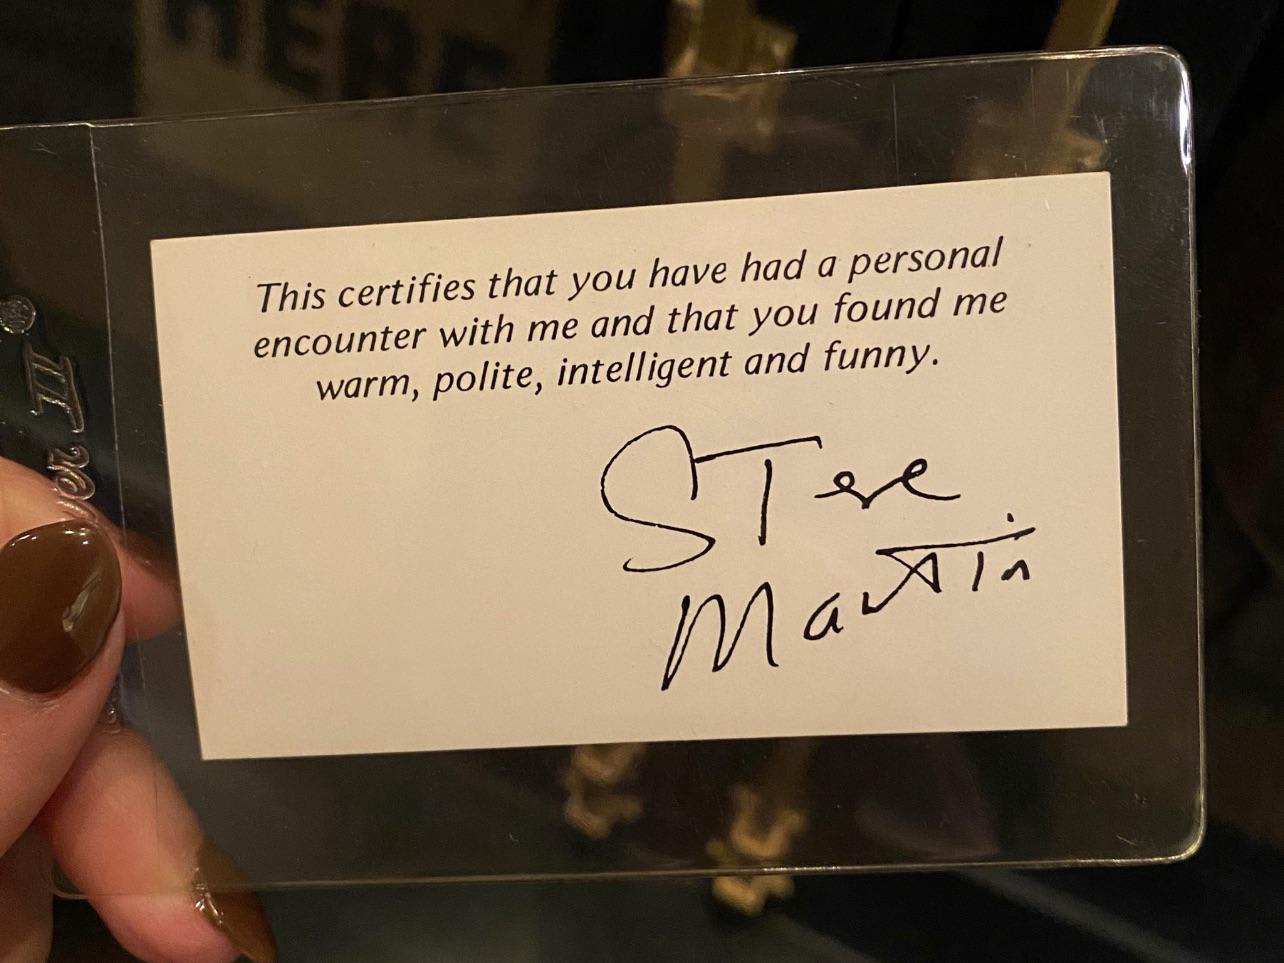 If you ever meet Steve Martin by chance, he gives you a card as proof you met him.